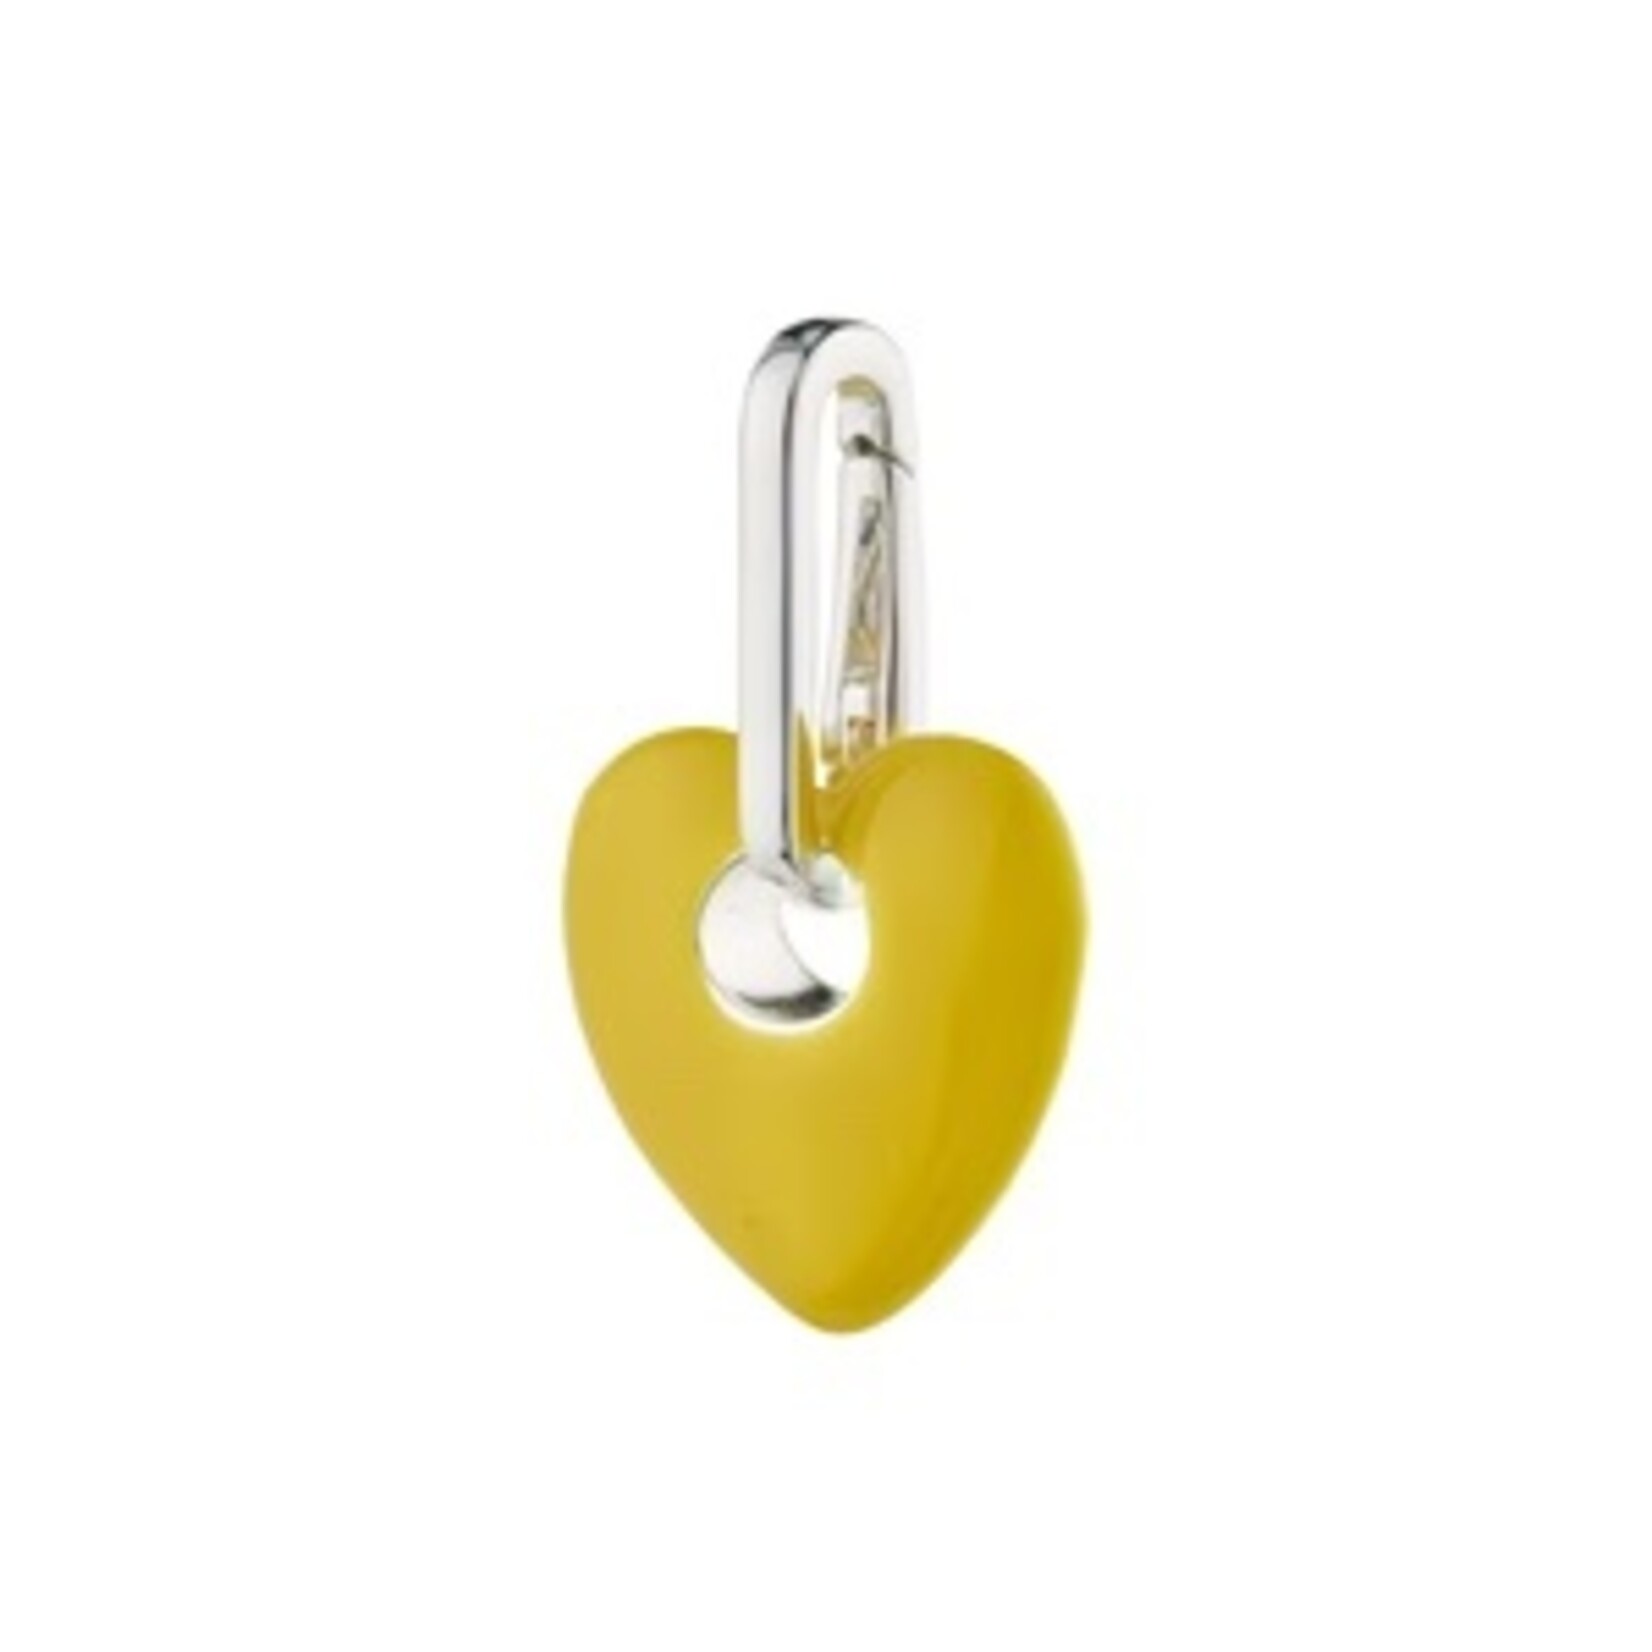 Pilgrim Charm, Recycled Heart Pendant, Yellow/Silver-Plated